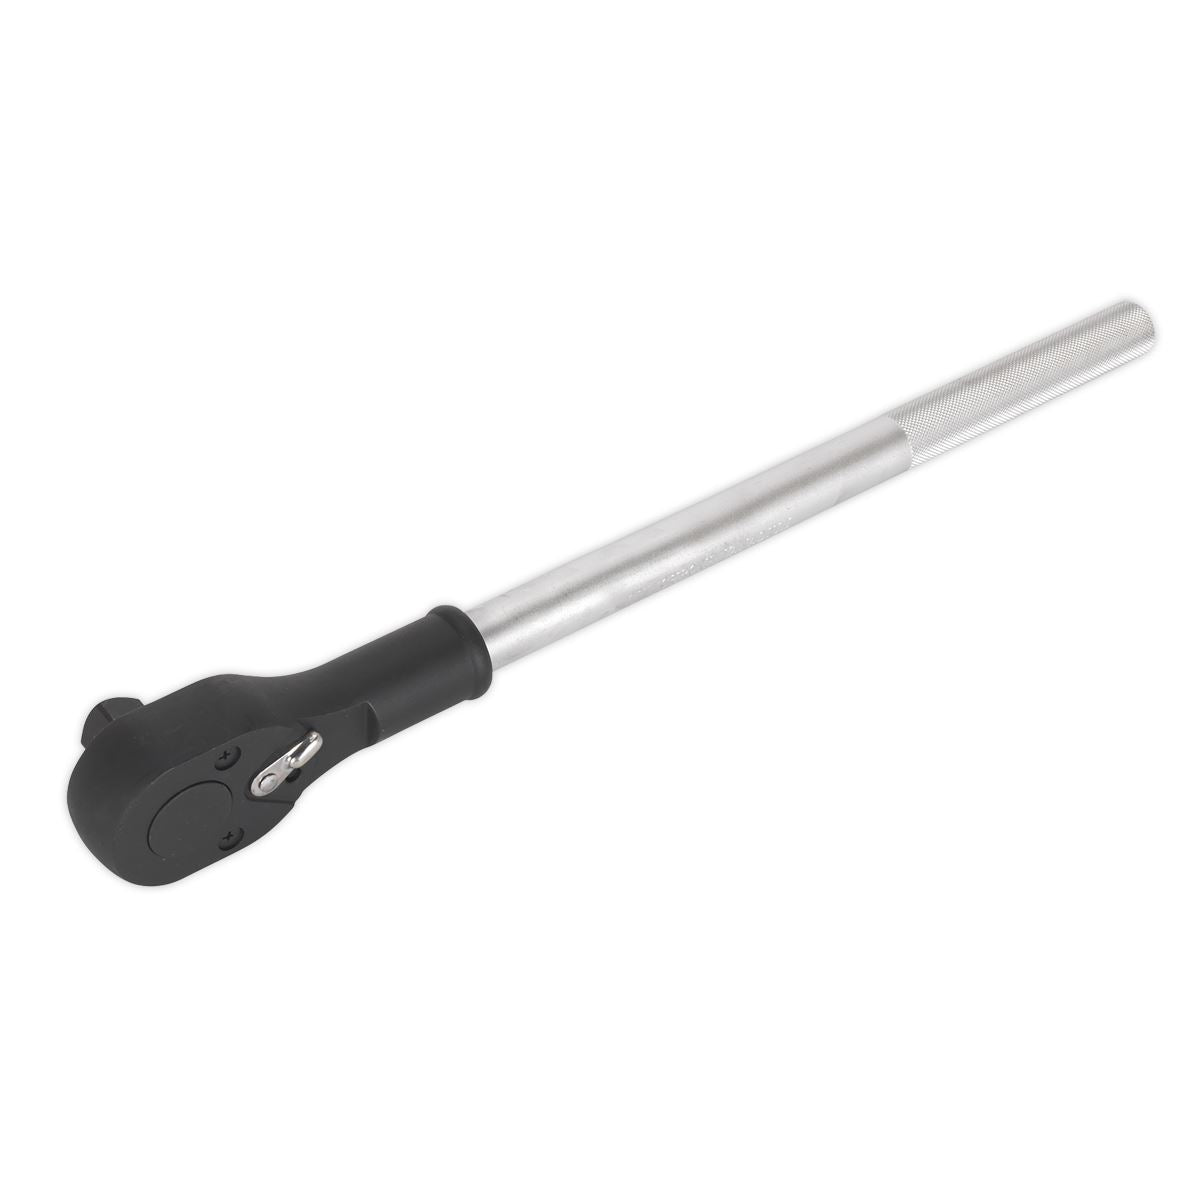 Sealey Premier Ratchet Wrench Pear-Head 3/4"Sq Drive